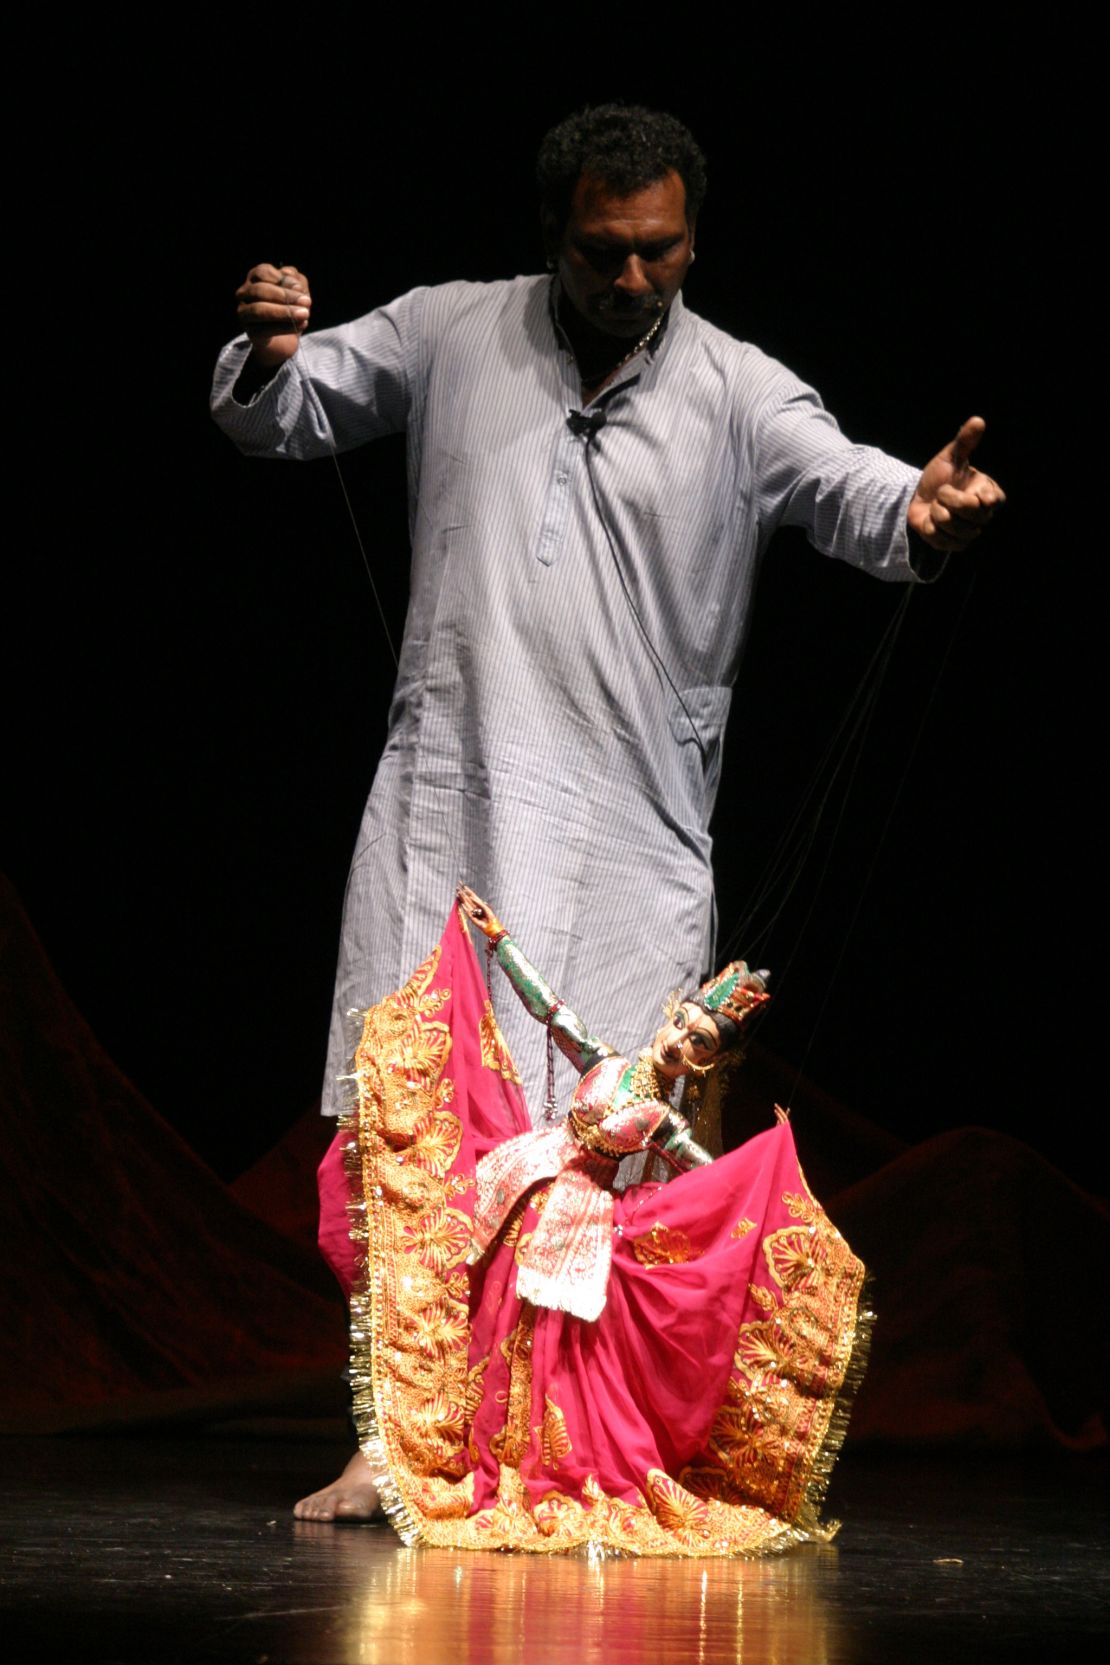 A portrait of Puran Bhatt performing with a puppet.